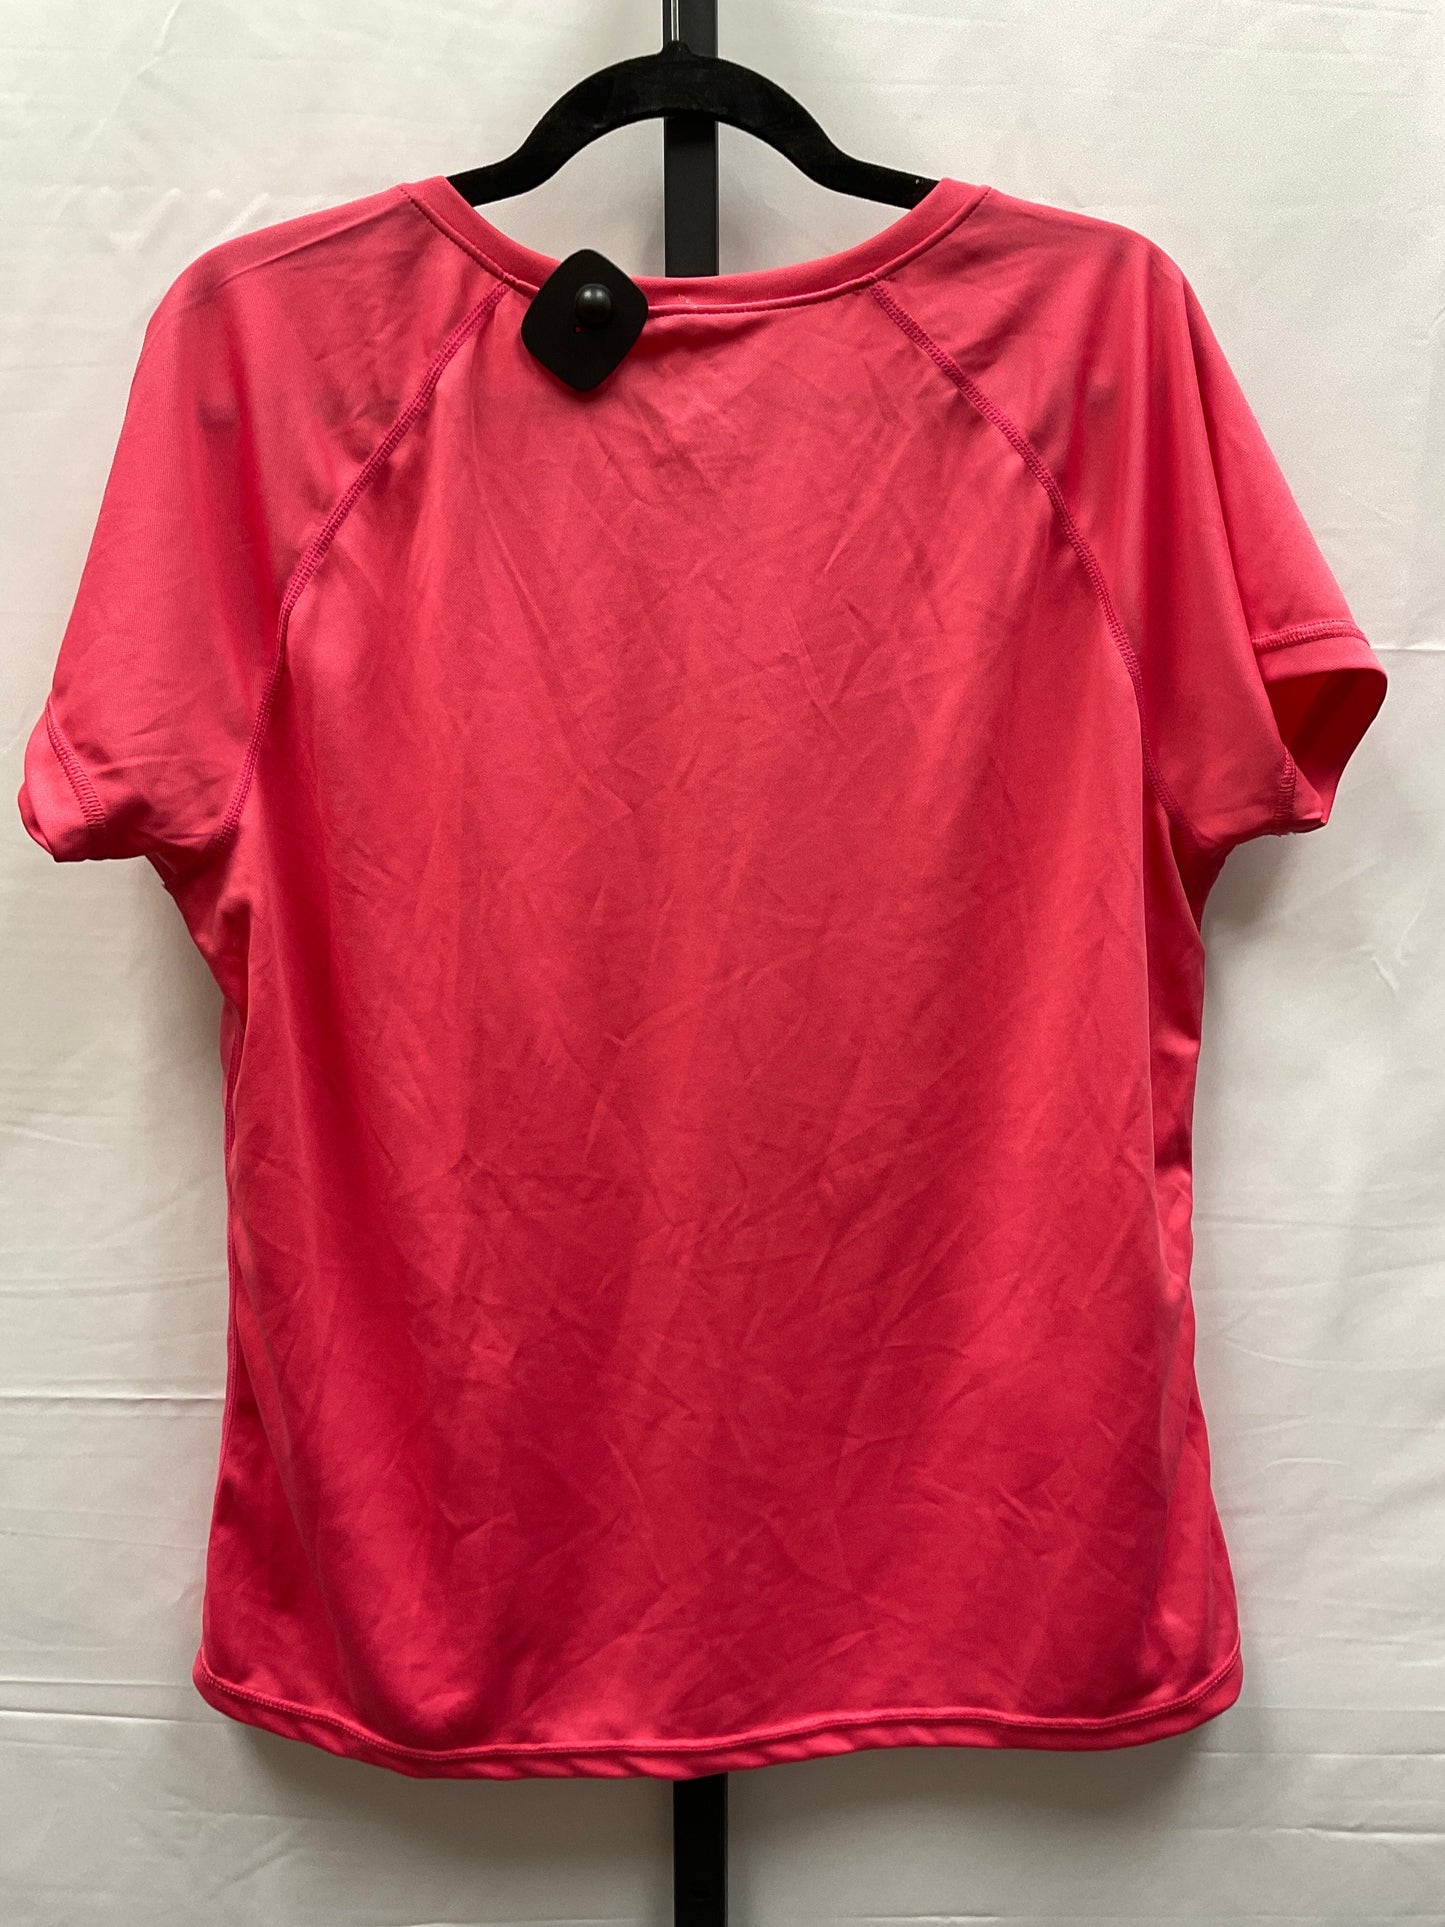 Pink Athletic Top Short Sleeve Clothes Mentor, Size Xxl